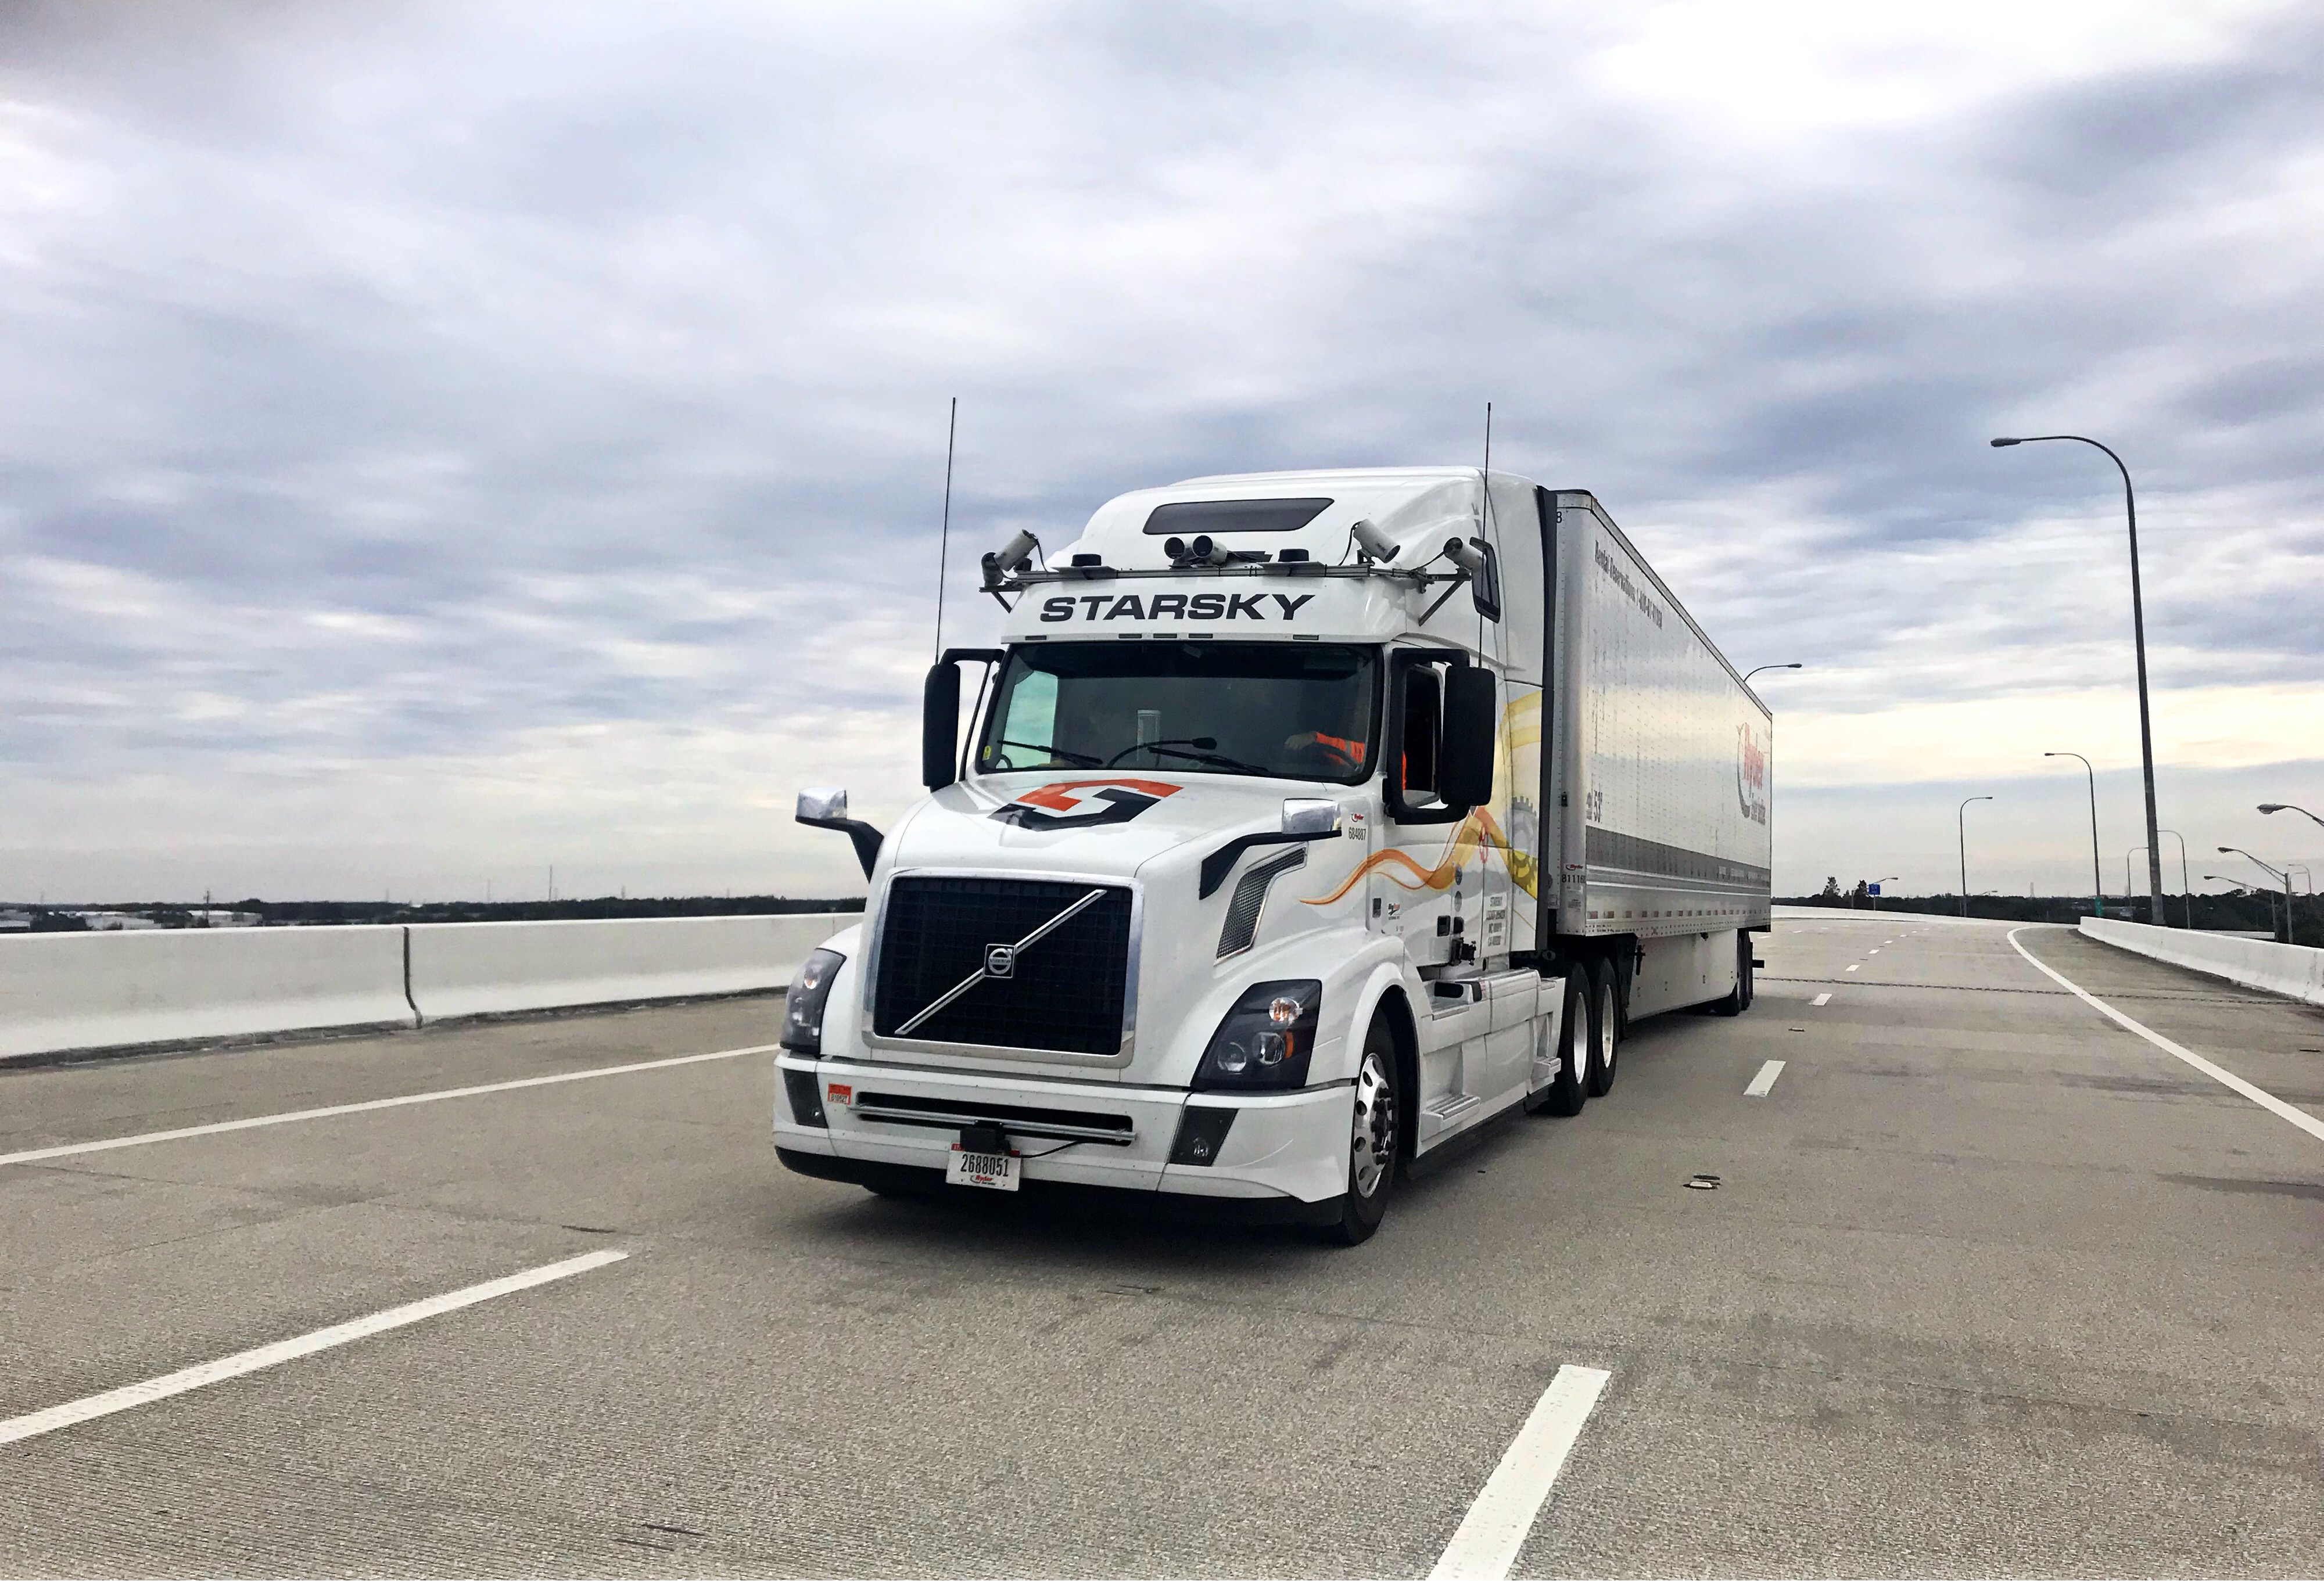 On the to self-driving trucks, Starsky built a trucking business | TechCrunch